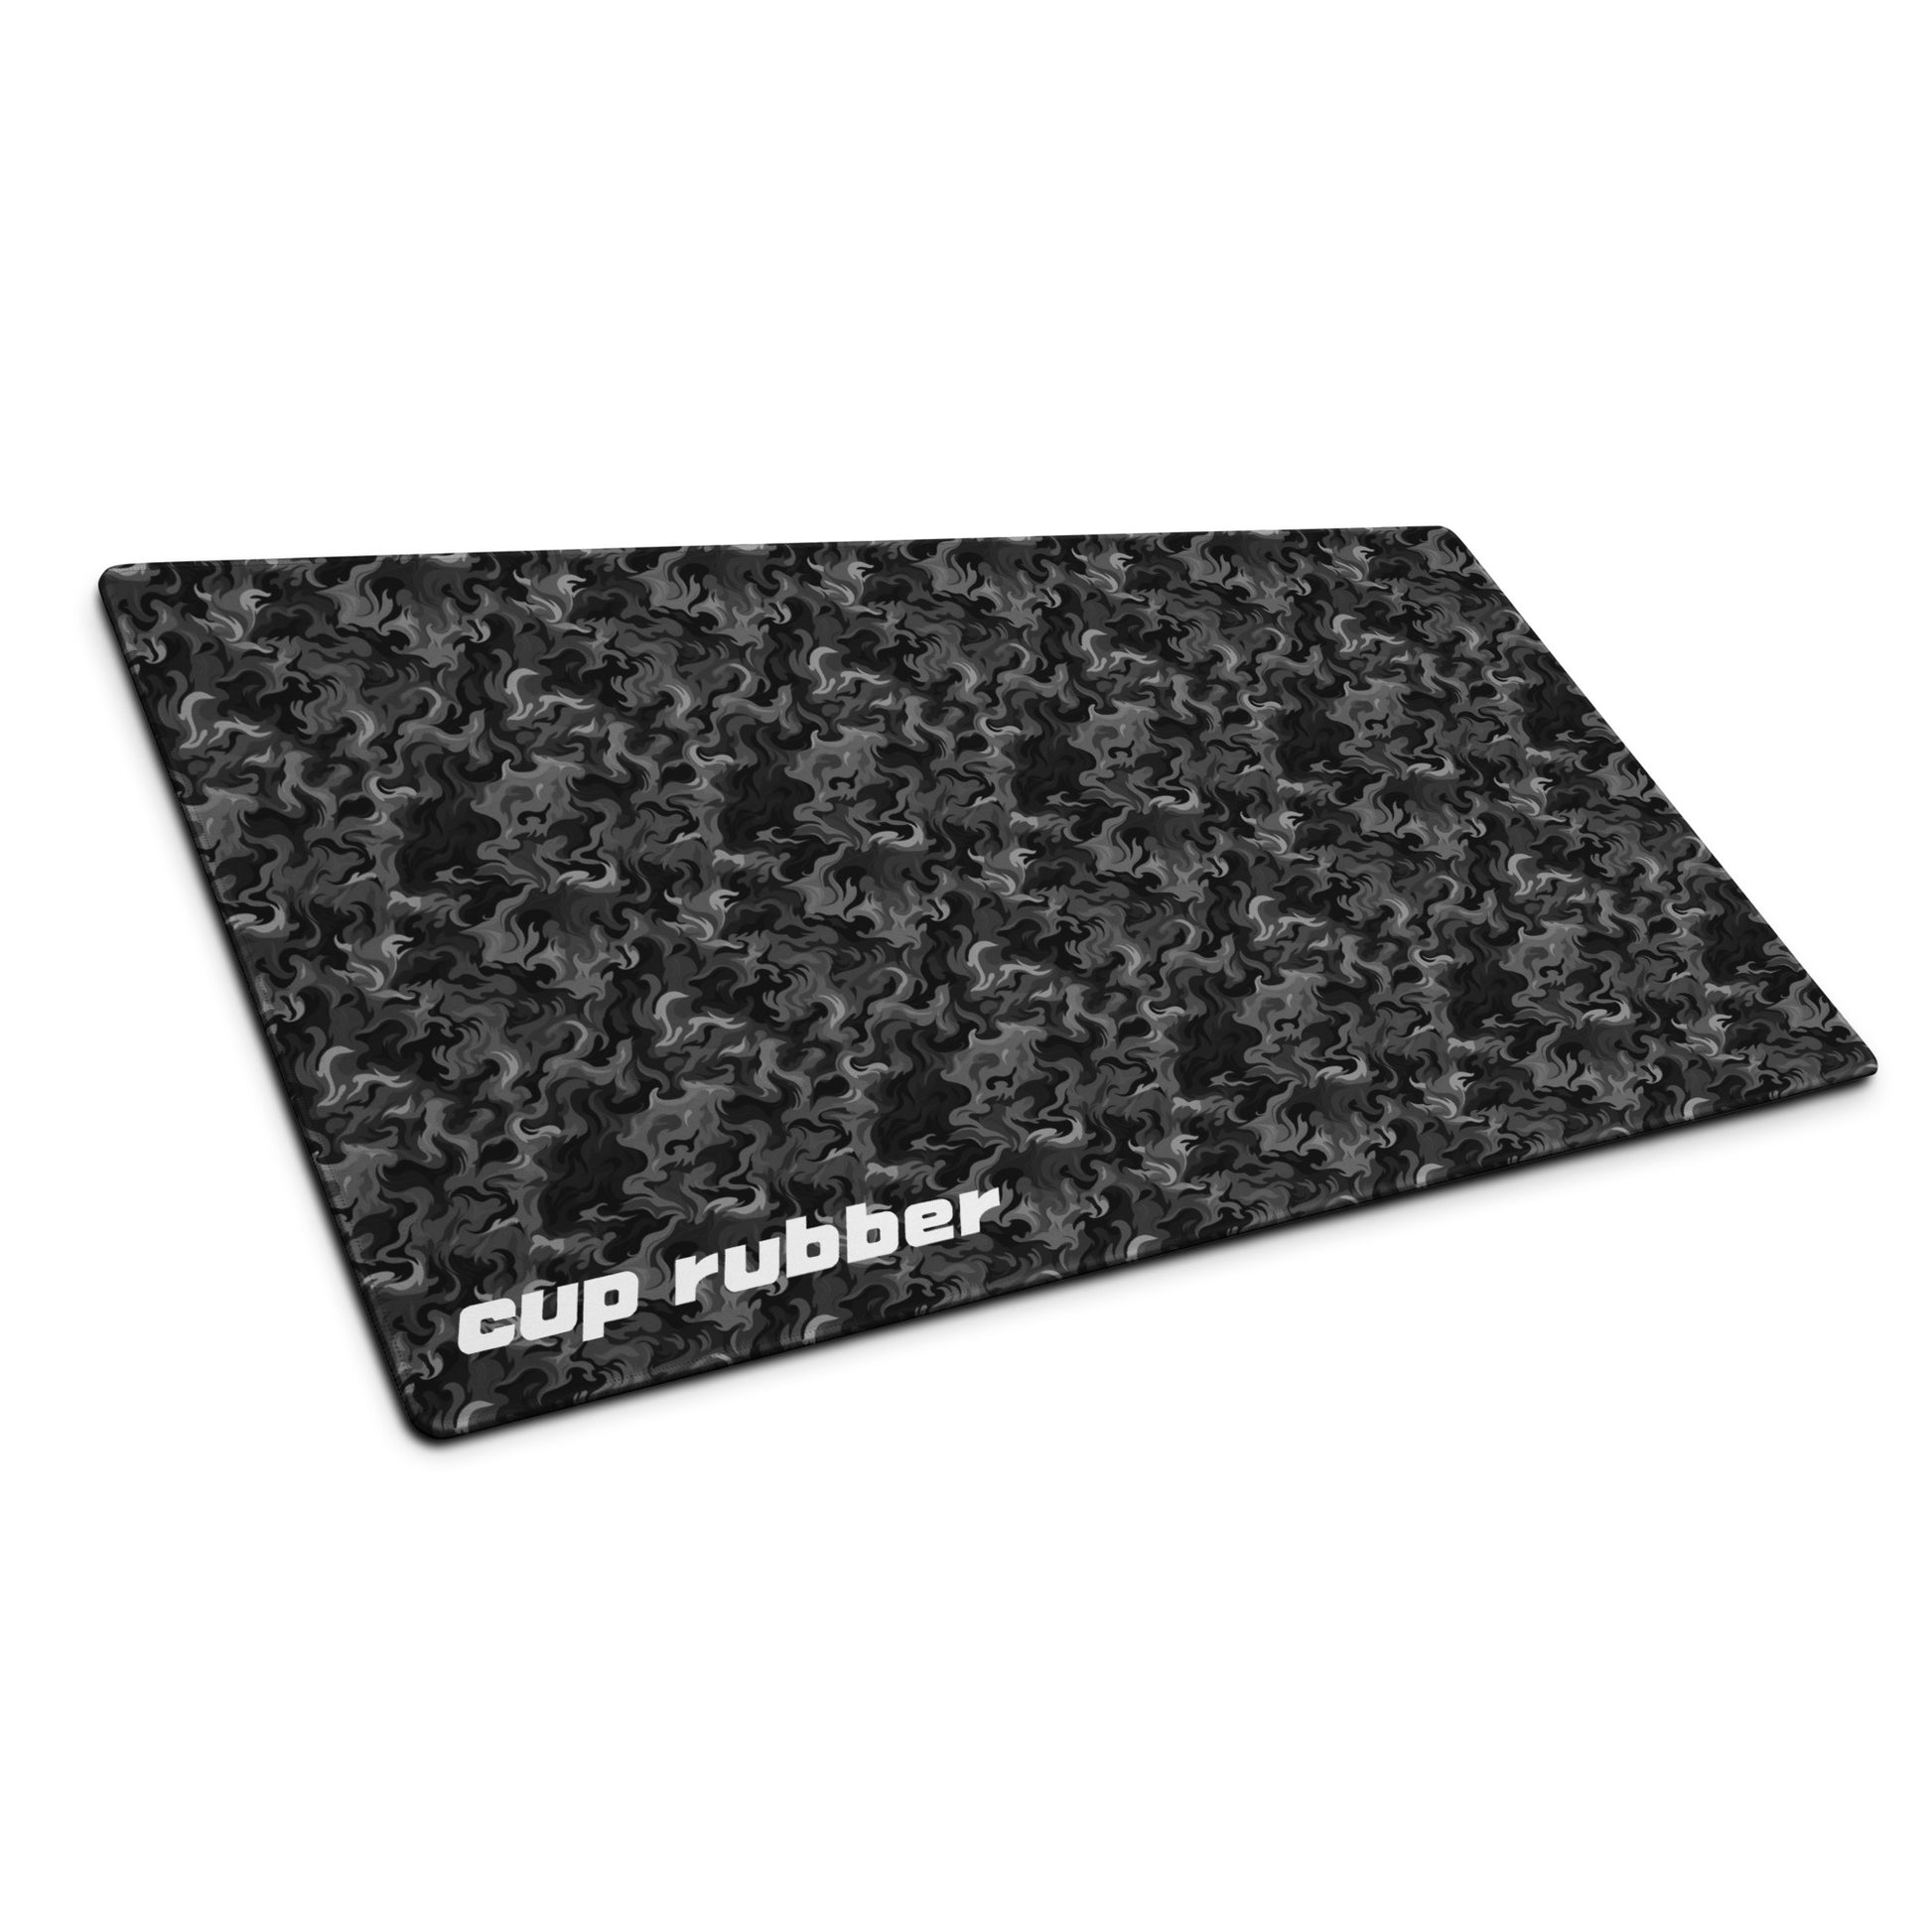 A 36" x 18" desk pad with a camo pattern all over it and the word "Cup Rubber" in the bottom left corner shown at an angle. Black and Charcoal in color.